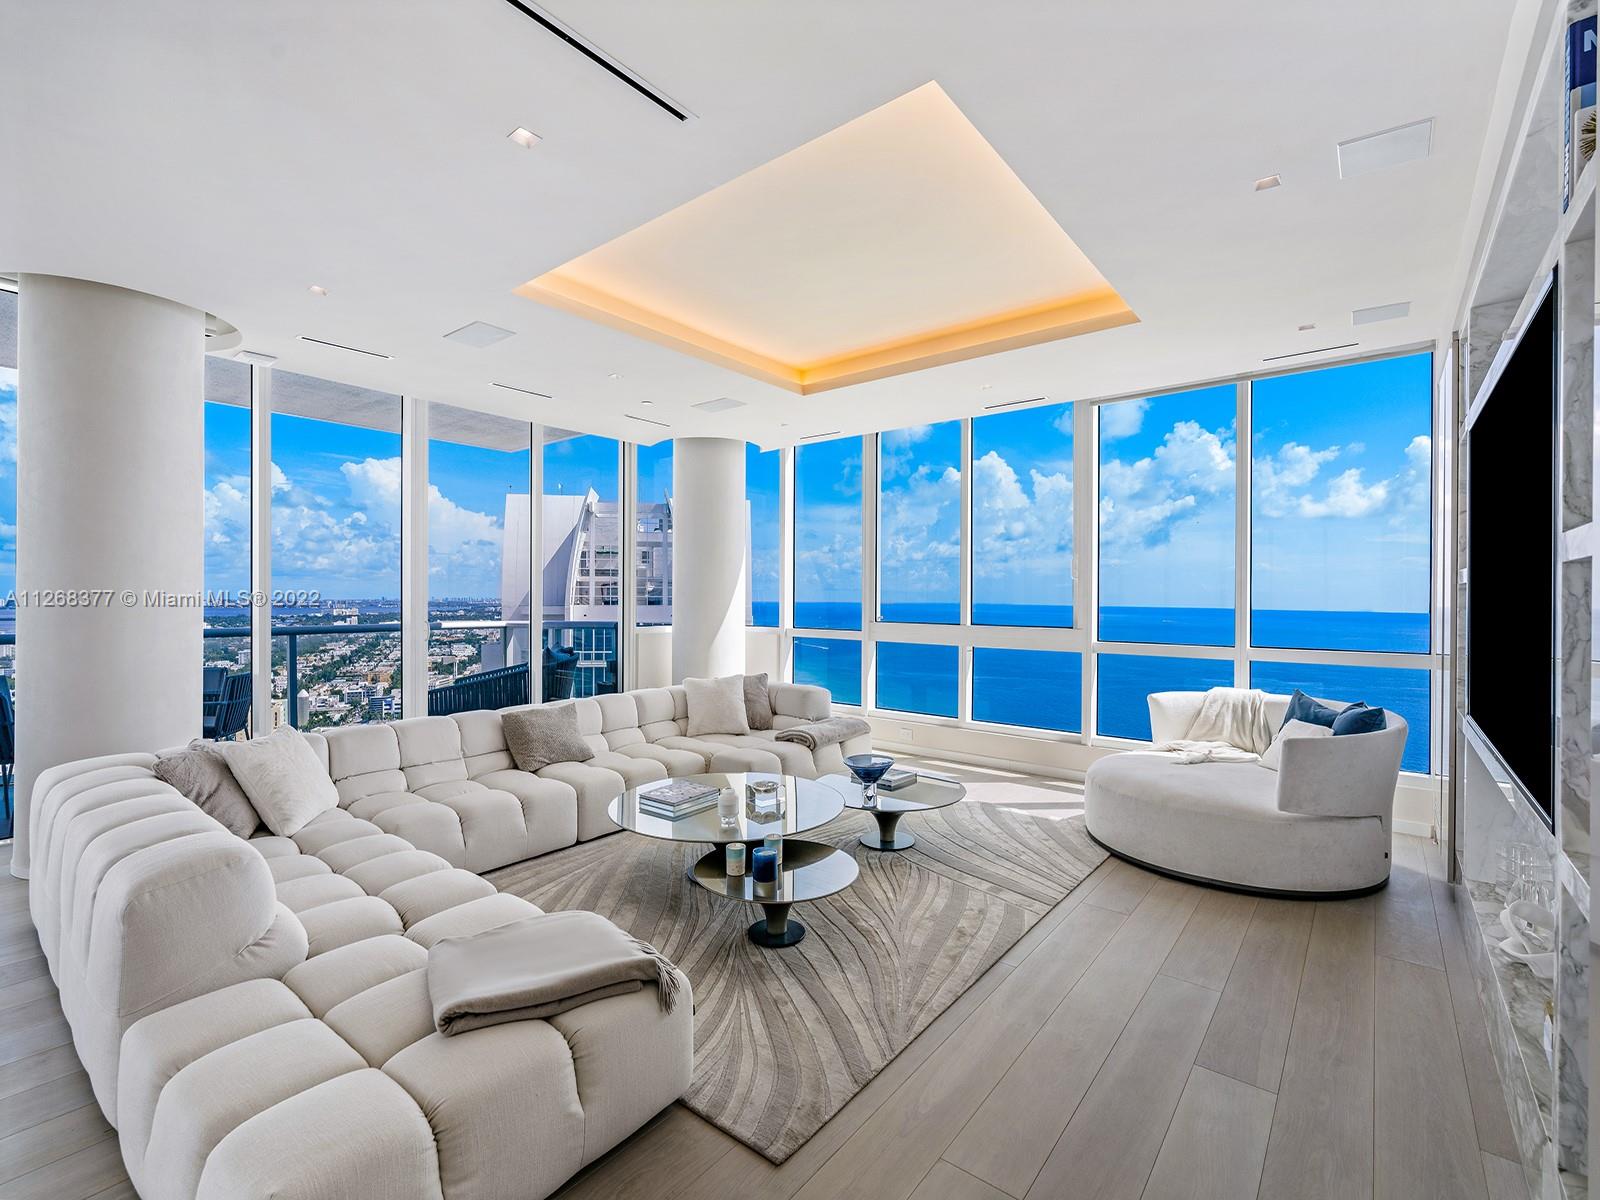 This extraordinary residence atop Miami Beach’s iconic Continuum South Tower has been completely renovated to the highest standards of comfort, luxury, and exquisite taste, offers 3 beds, 4.5 baths, plus a den that can utilized as an additional bedroom. A private elevator entry and central art gallery lead to the glass-enclosed great room with sensational 270-degree views of the ocean, bay, and Miami skyline, while the chef’s kitchen features Miele and Subzero appliances, a wine fridge, and an espresso maker. Resplendent materials, including white oak, veiny marble, and golden agate, add visual delight, while an advanced smart home system controls lighting, audio, window shades, and more. The 12-acre grounds offer a beach club, cabanas, restaurant, a fitness center & spa, and more.